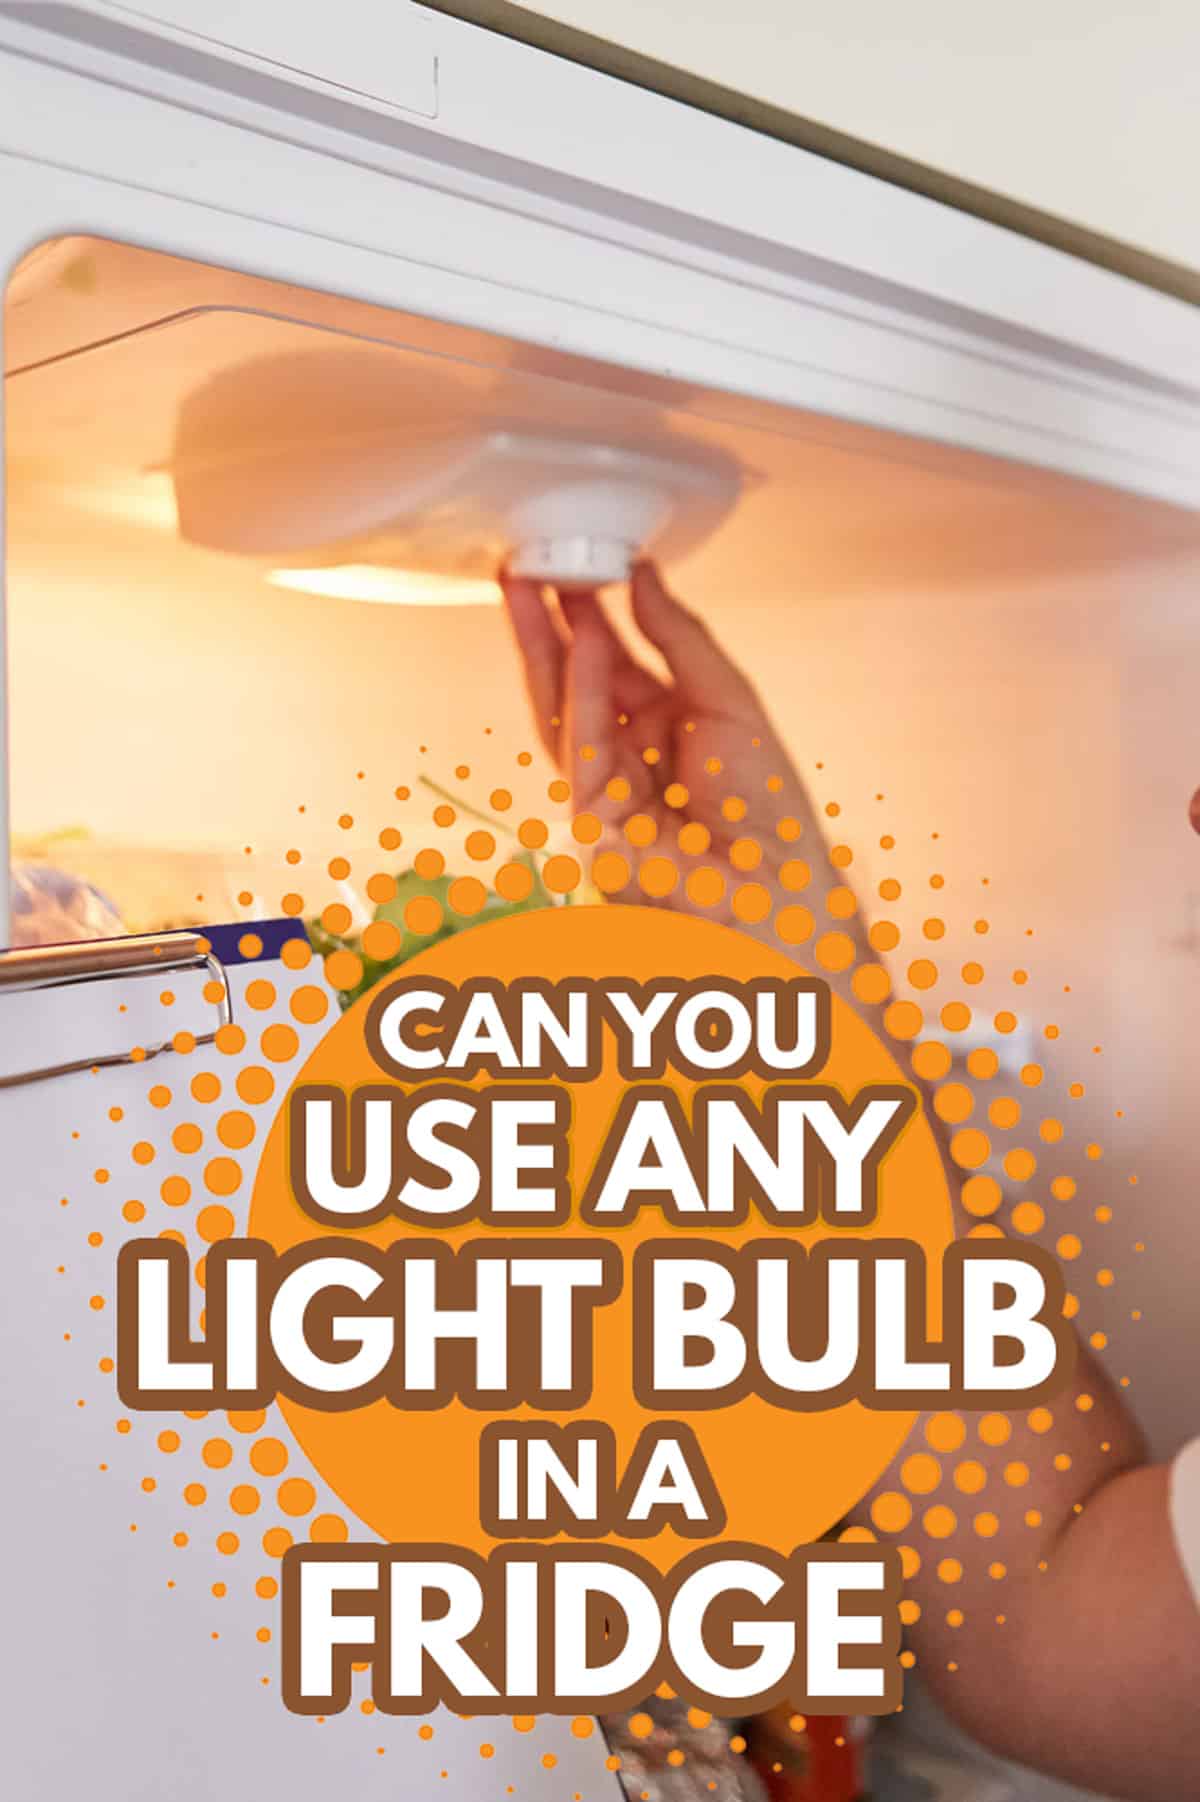 Handyman with checklist on clipboard checks lighting in refrigerator - Can You Use Any Light Bulb In A Fridge?